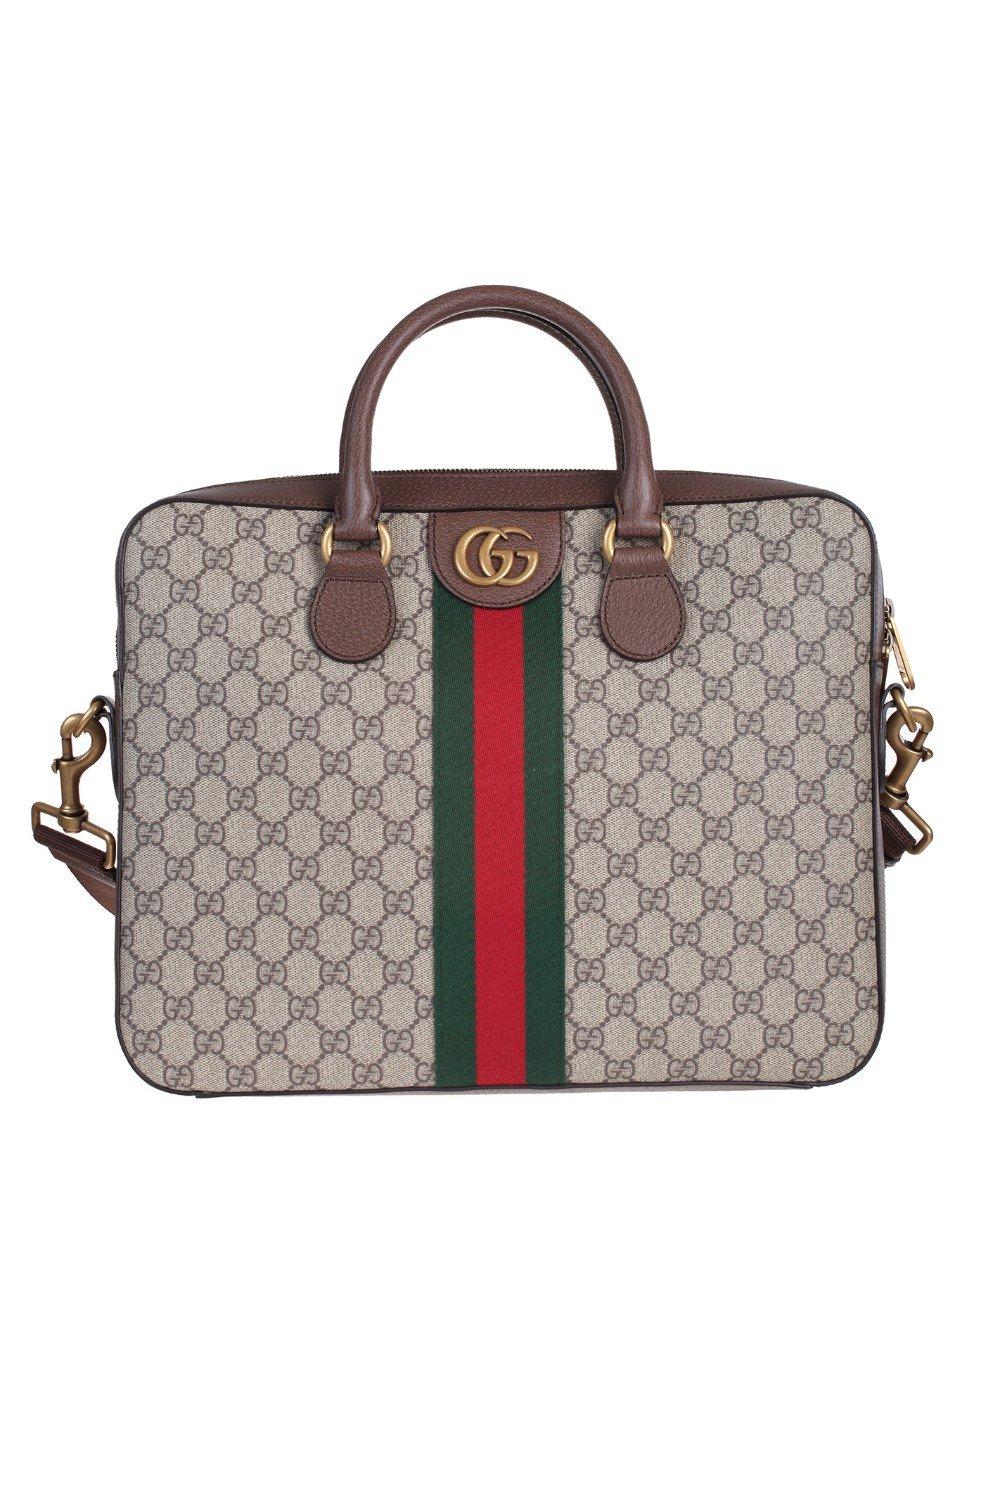 Gucci Leather Ophidia Briefcase In Gg Supreme Fabric in Beige (Natural) for Men - Lyst